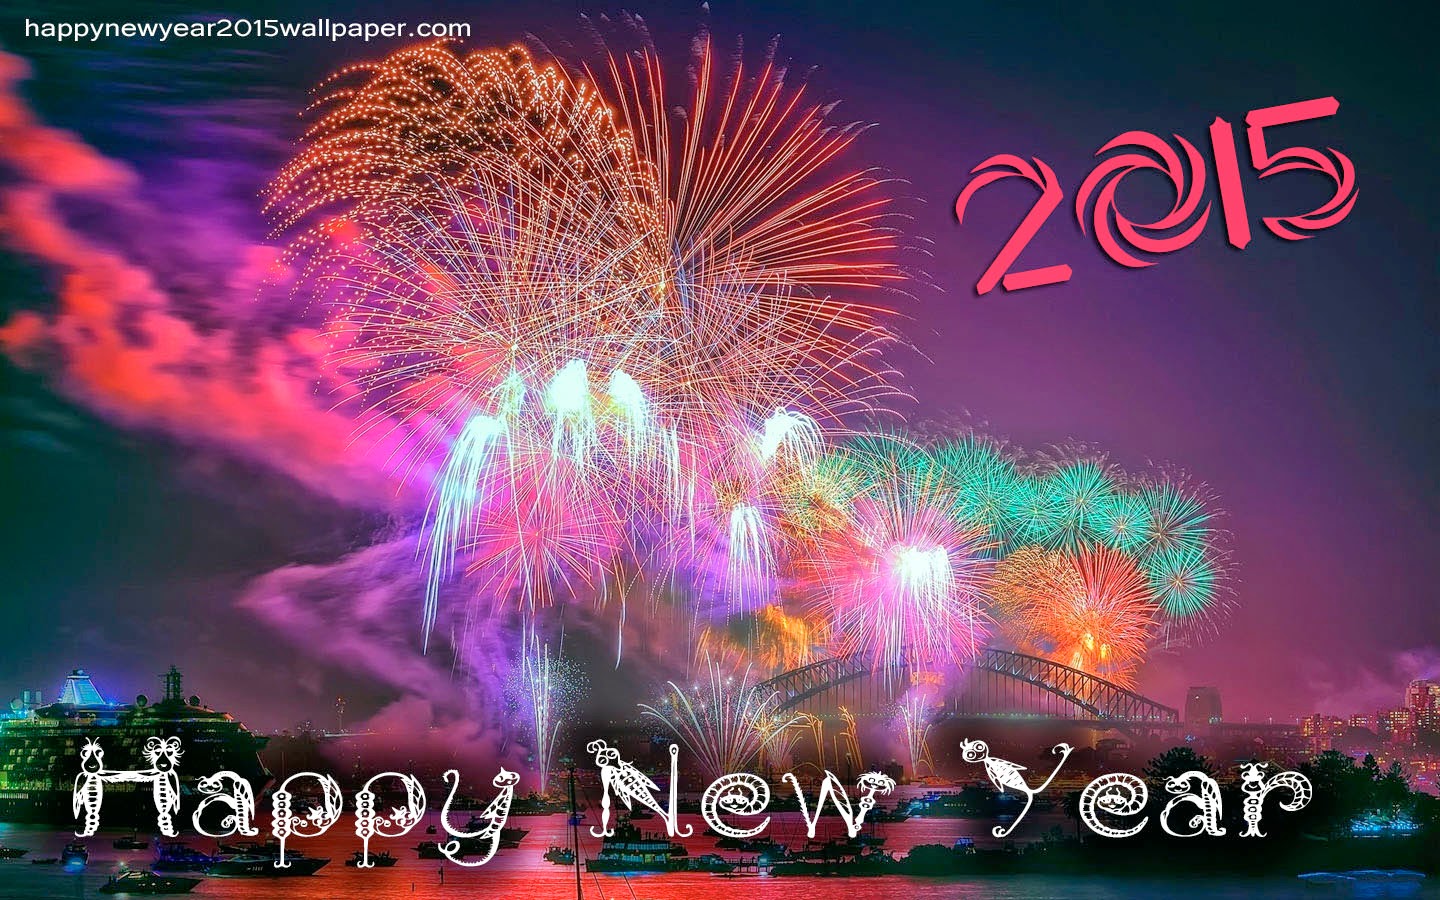 2016 happy new year wallpapers 2015   Grasscloth Wallpaper